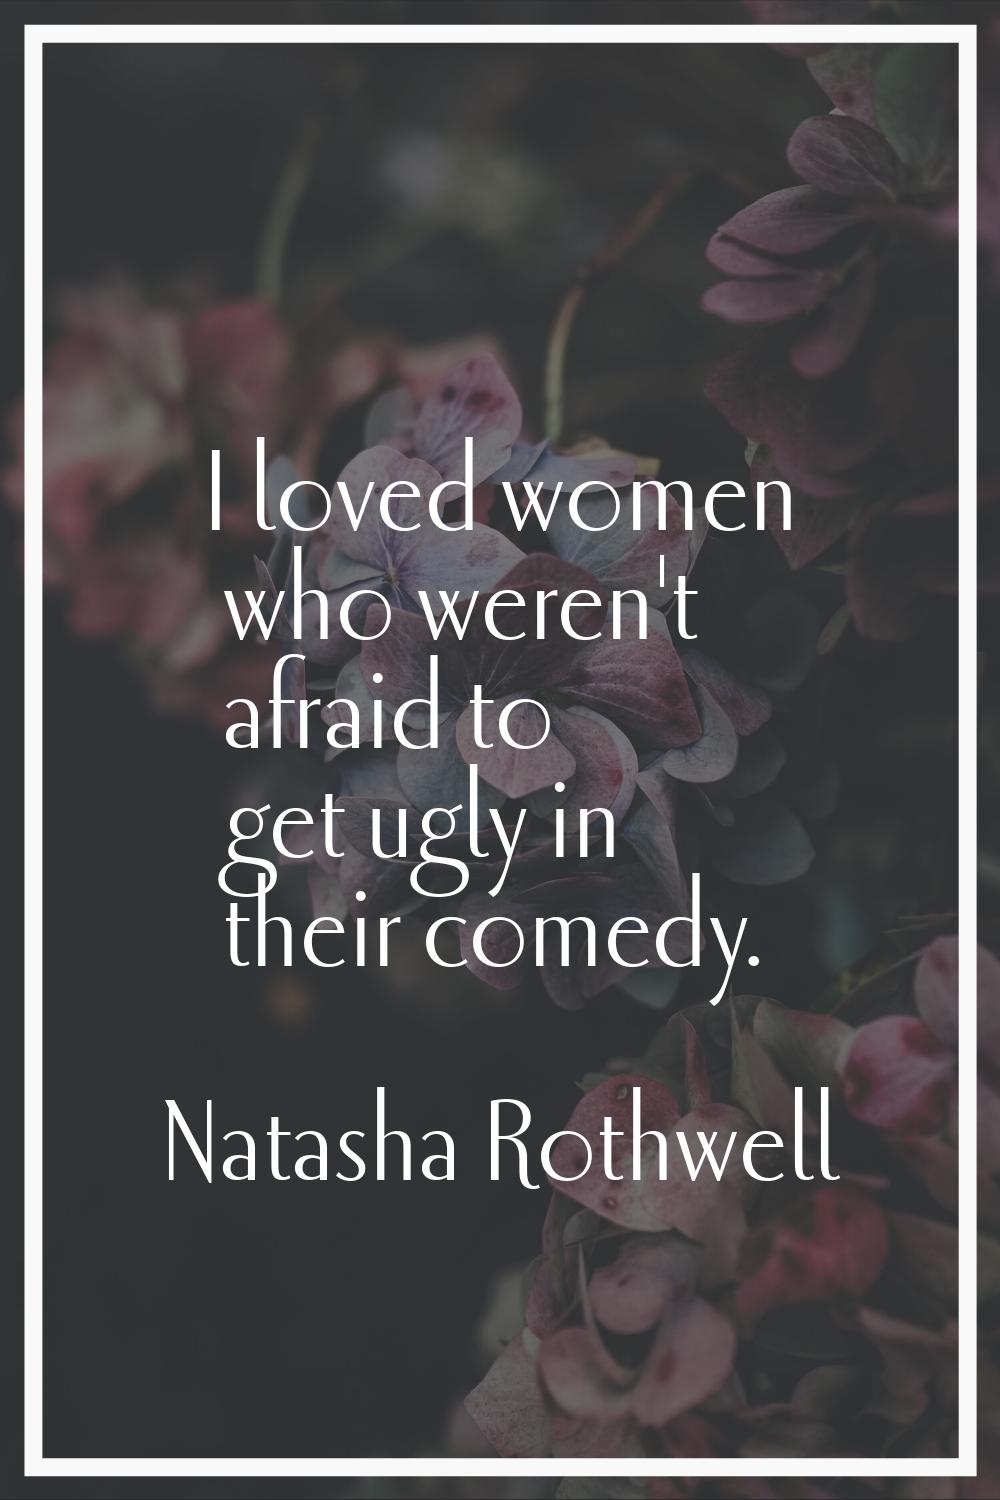 I loved women who weren't afraid to get ugly in their comedy.